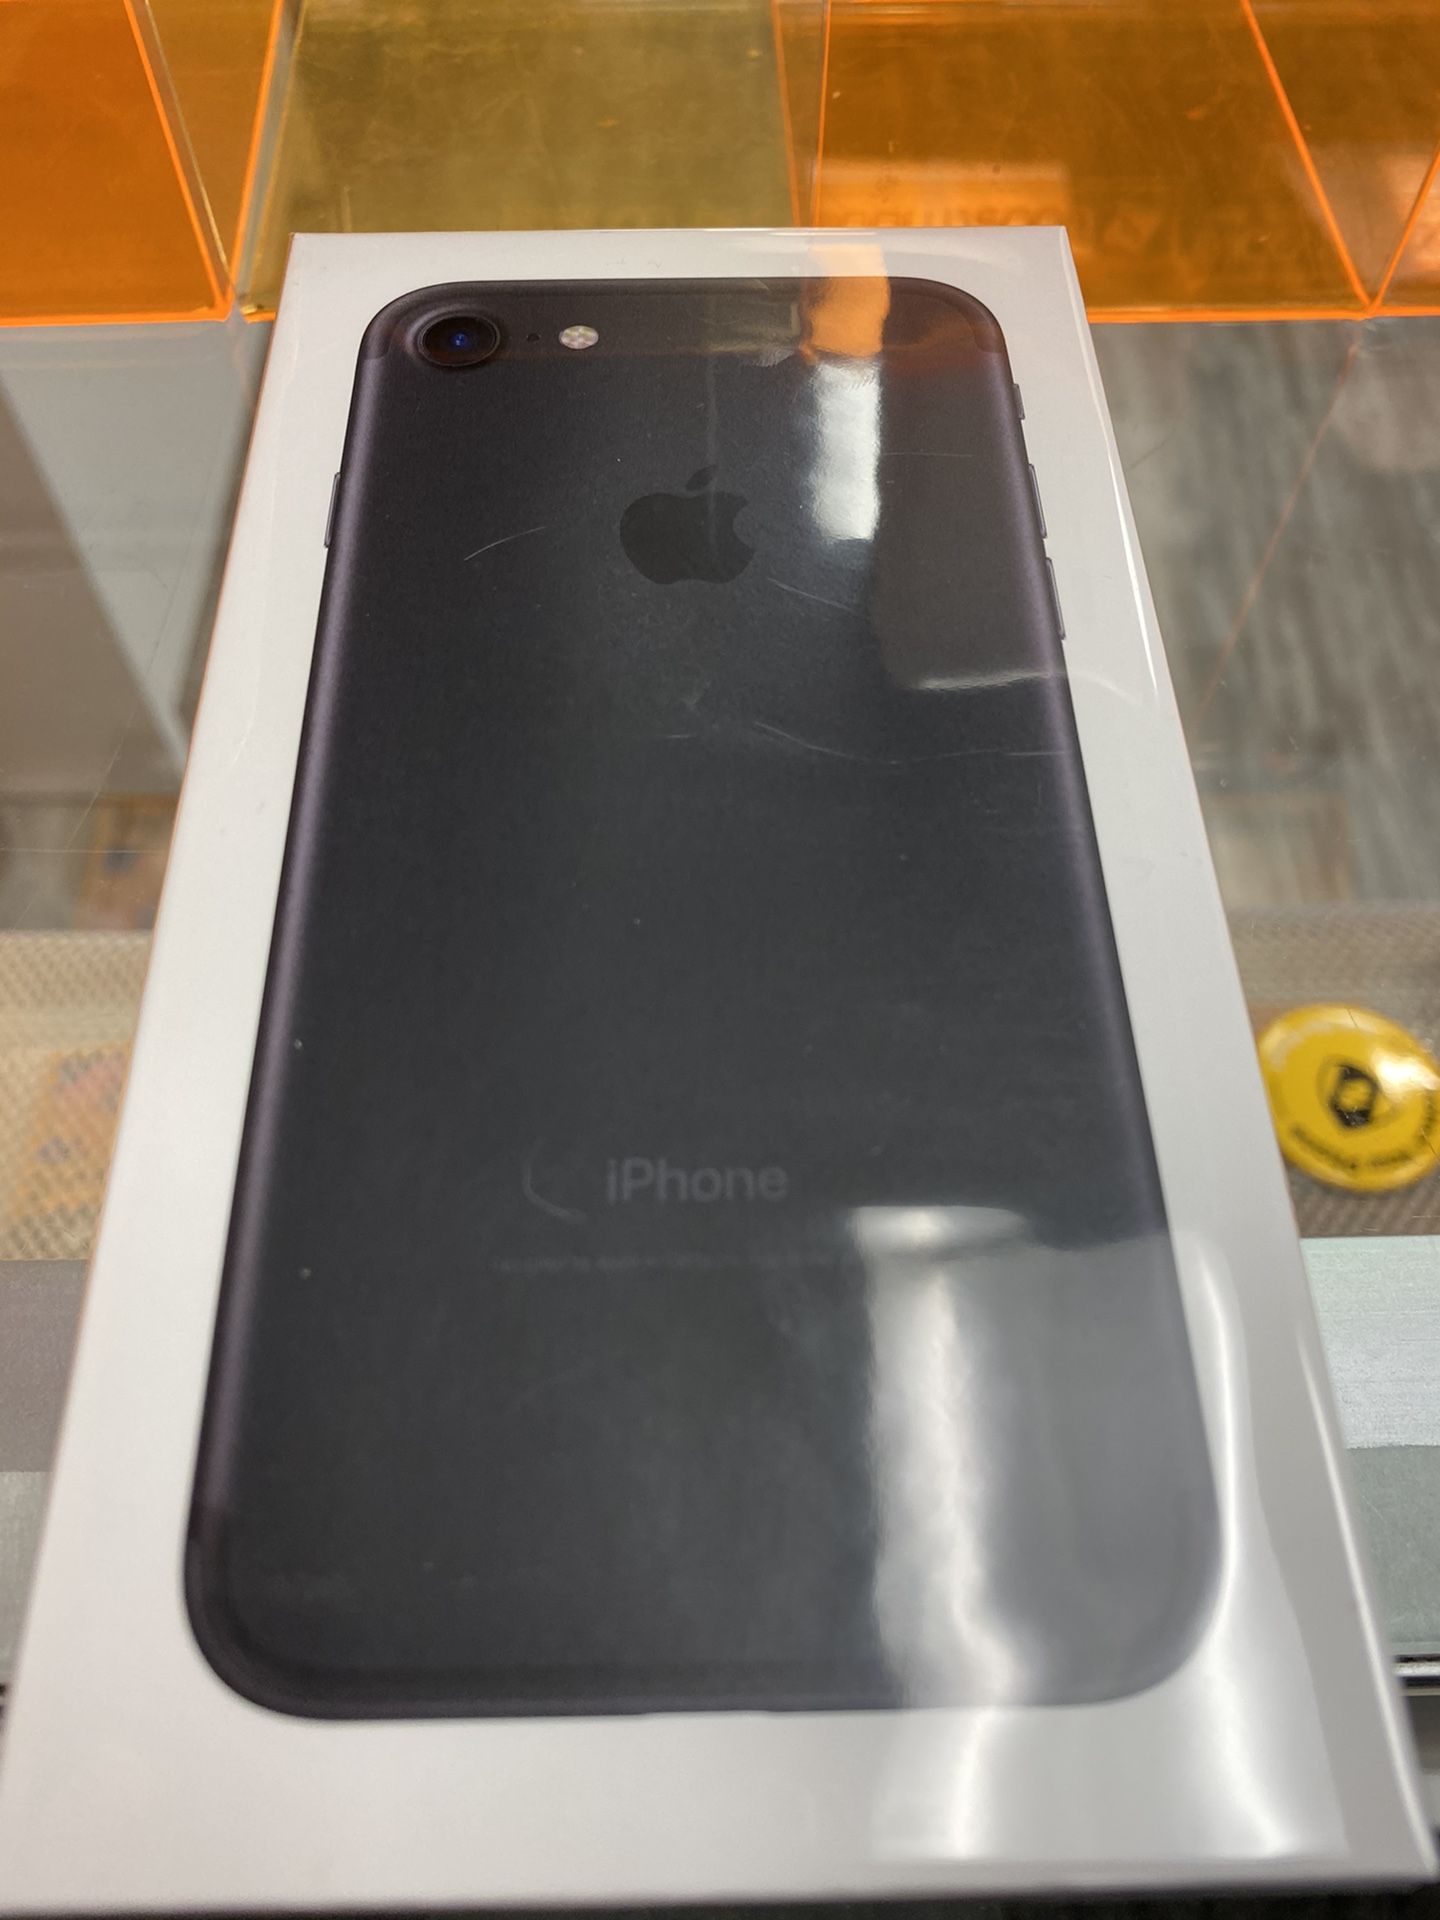 Boost iPhone 7 29$ when you switch to boost !